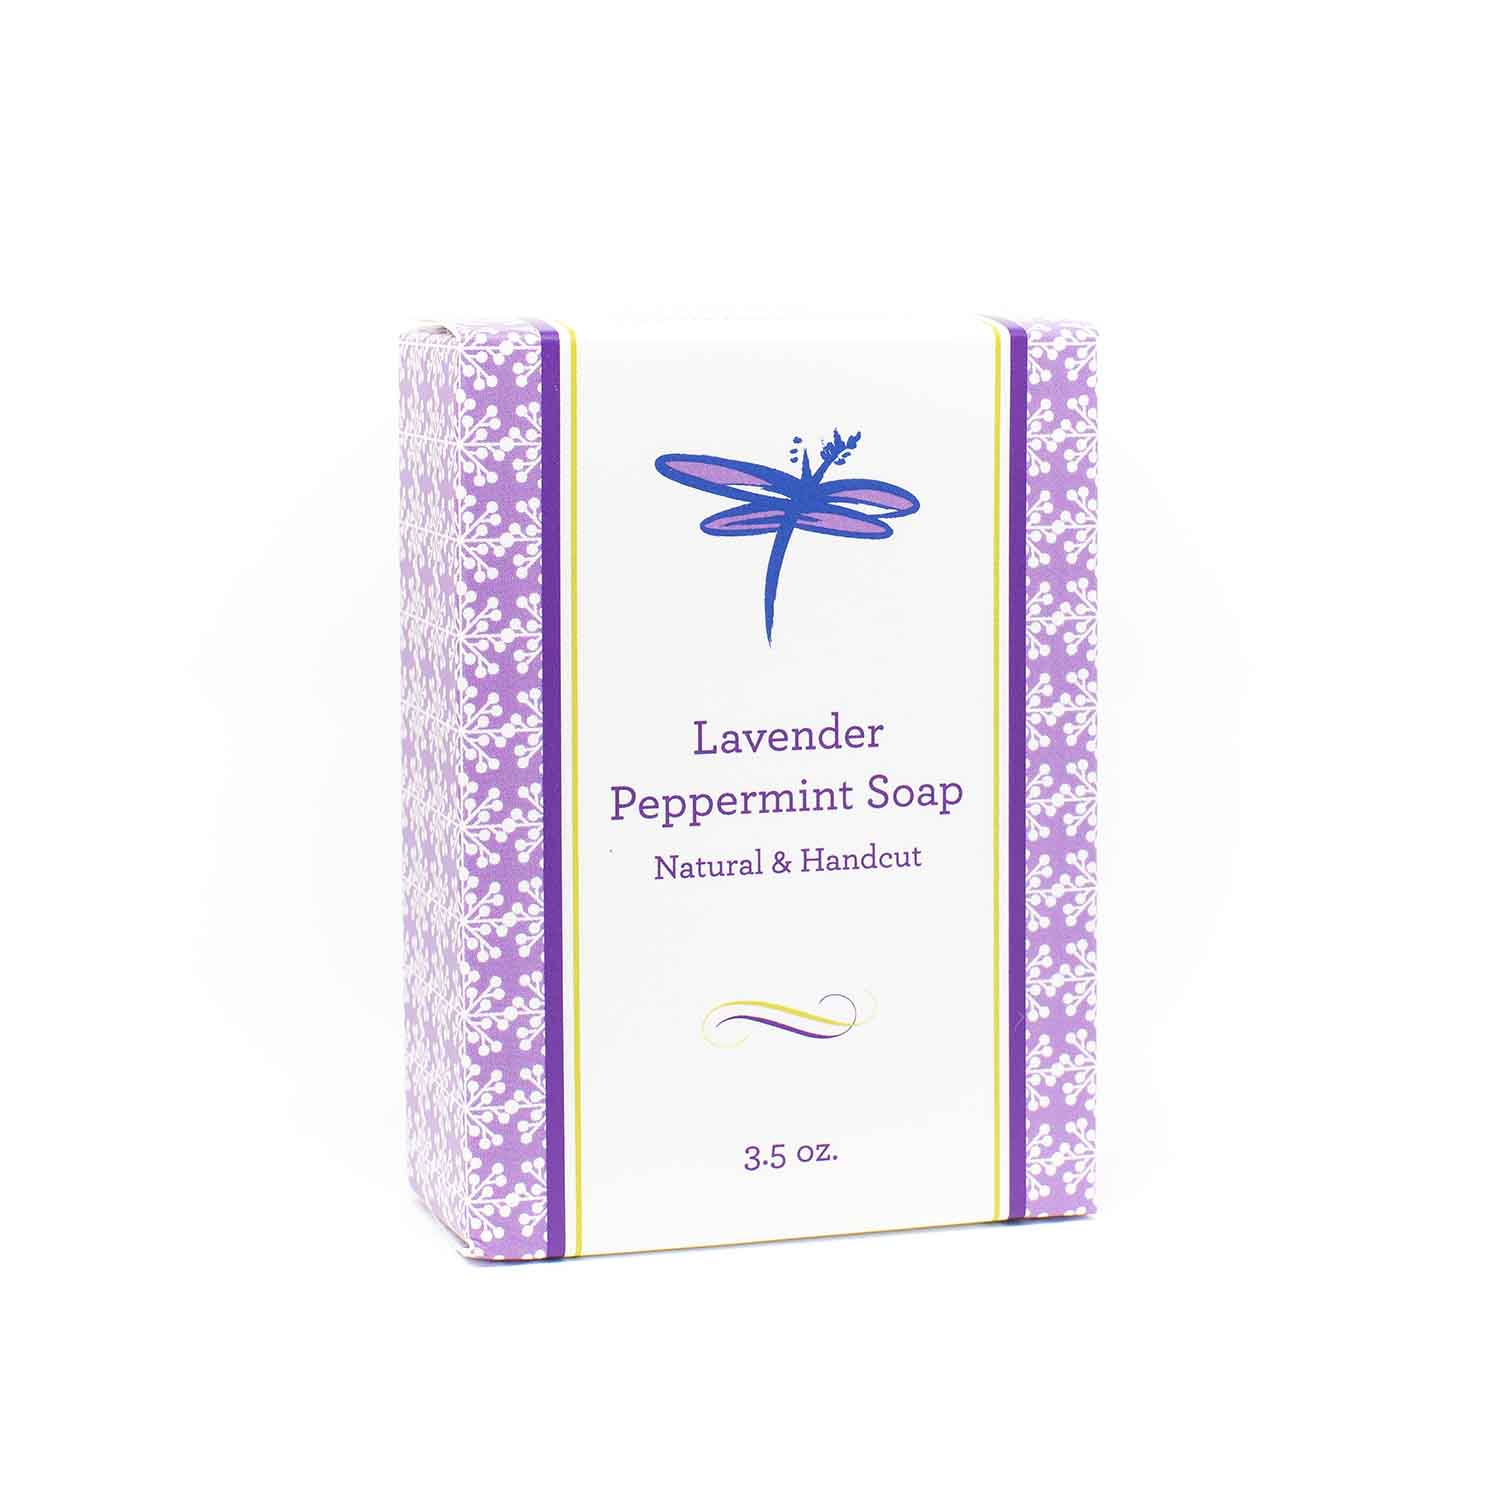 Lavender Peppermint Soap Hand Washing